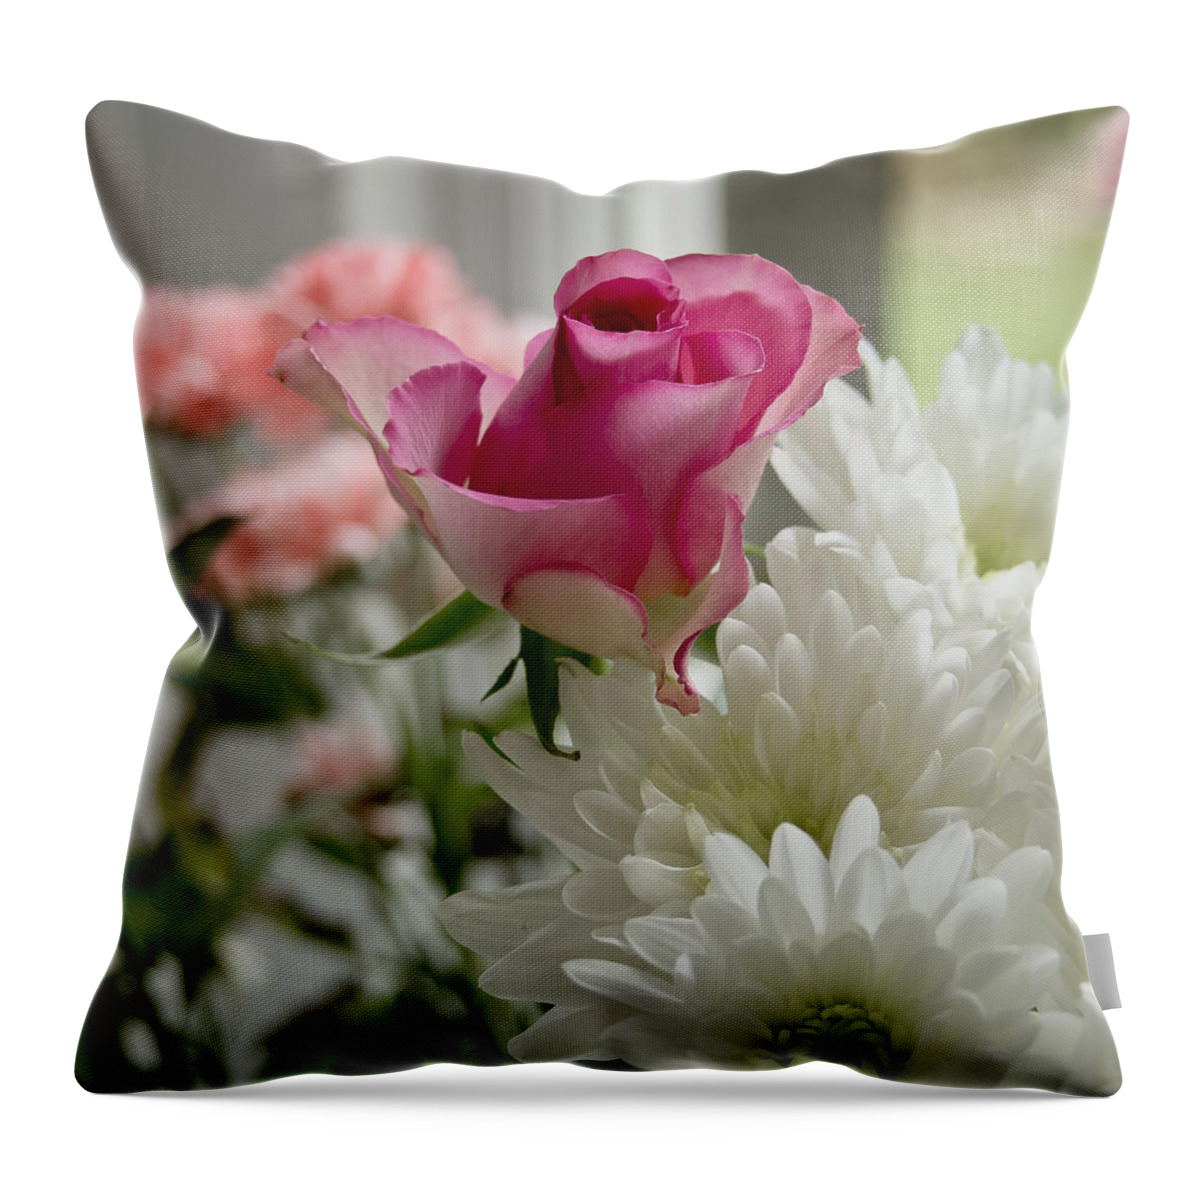 Floral Throw Pillow featuring the photograph Imperfection. by Elena Perelman